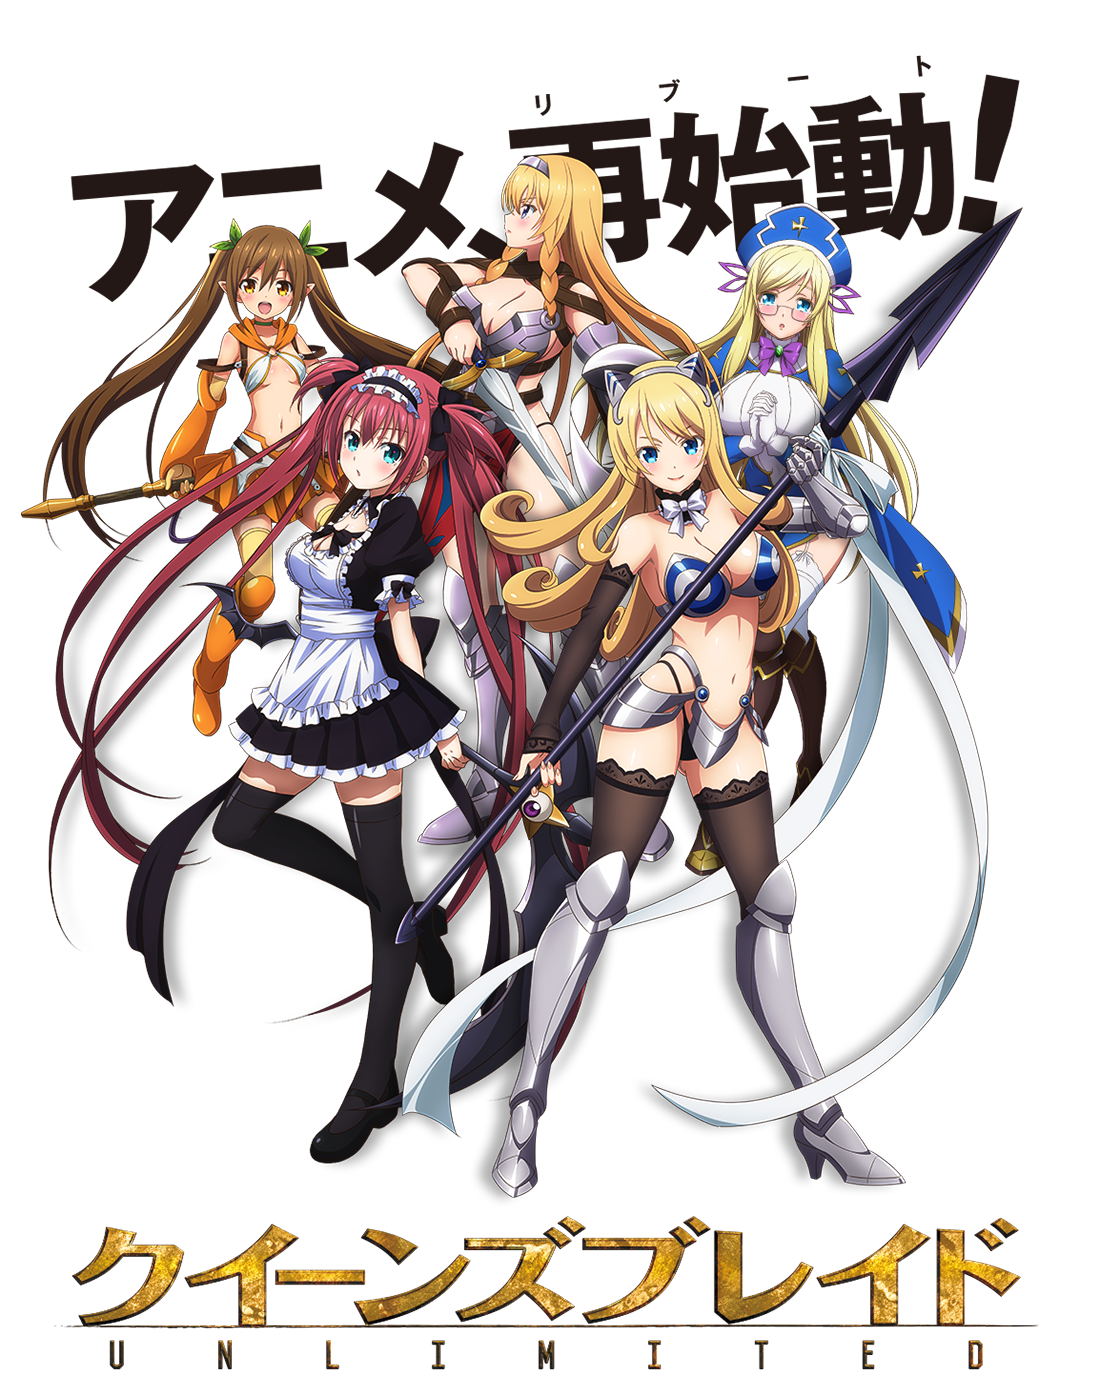 A second episode of the âQueenâs Blade: Unlimitedâ OVA series is scheduled for release on September 21st.